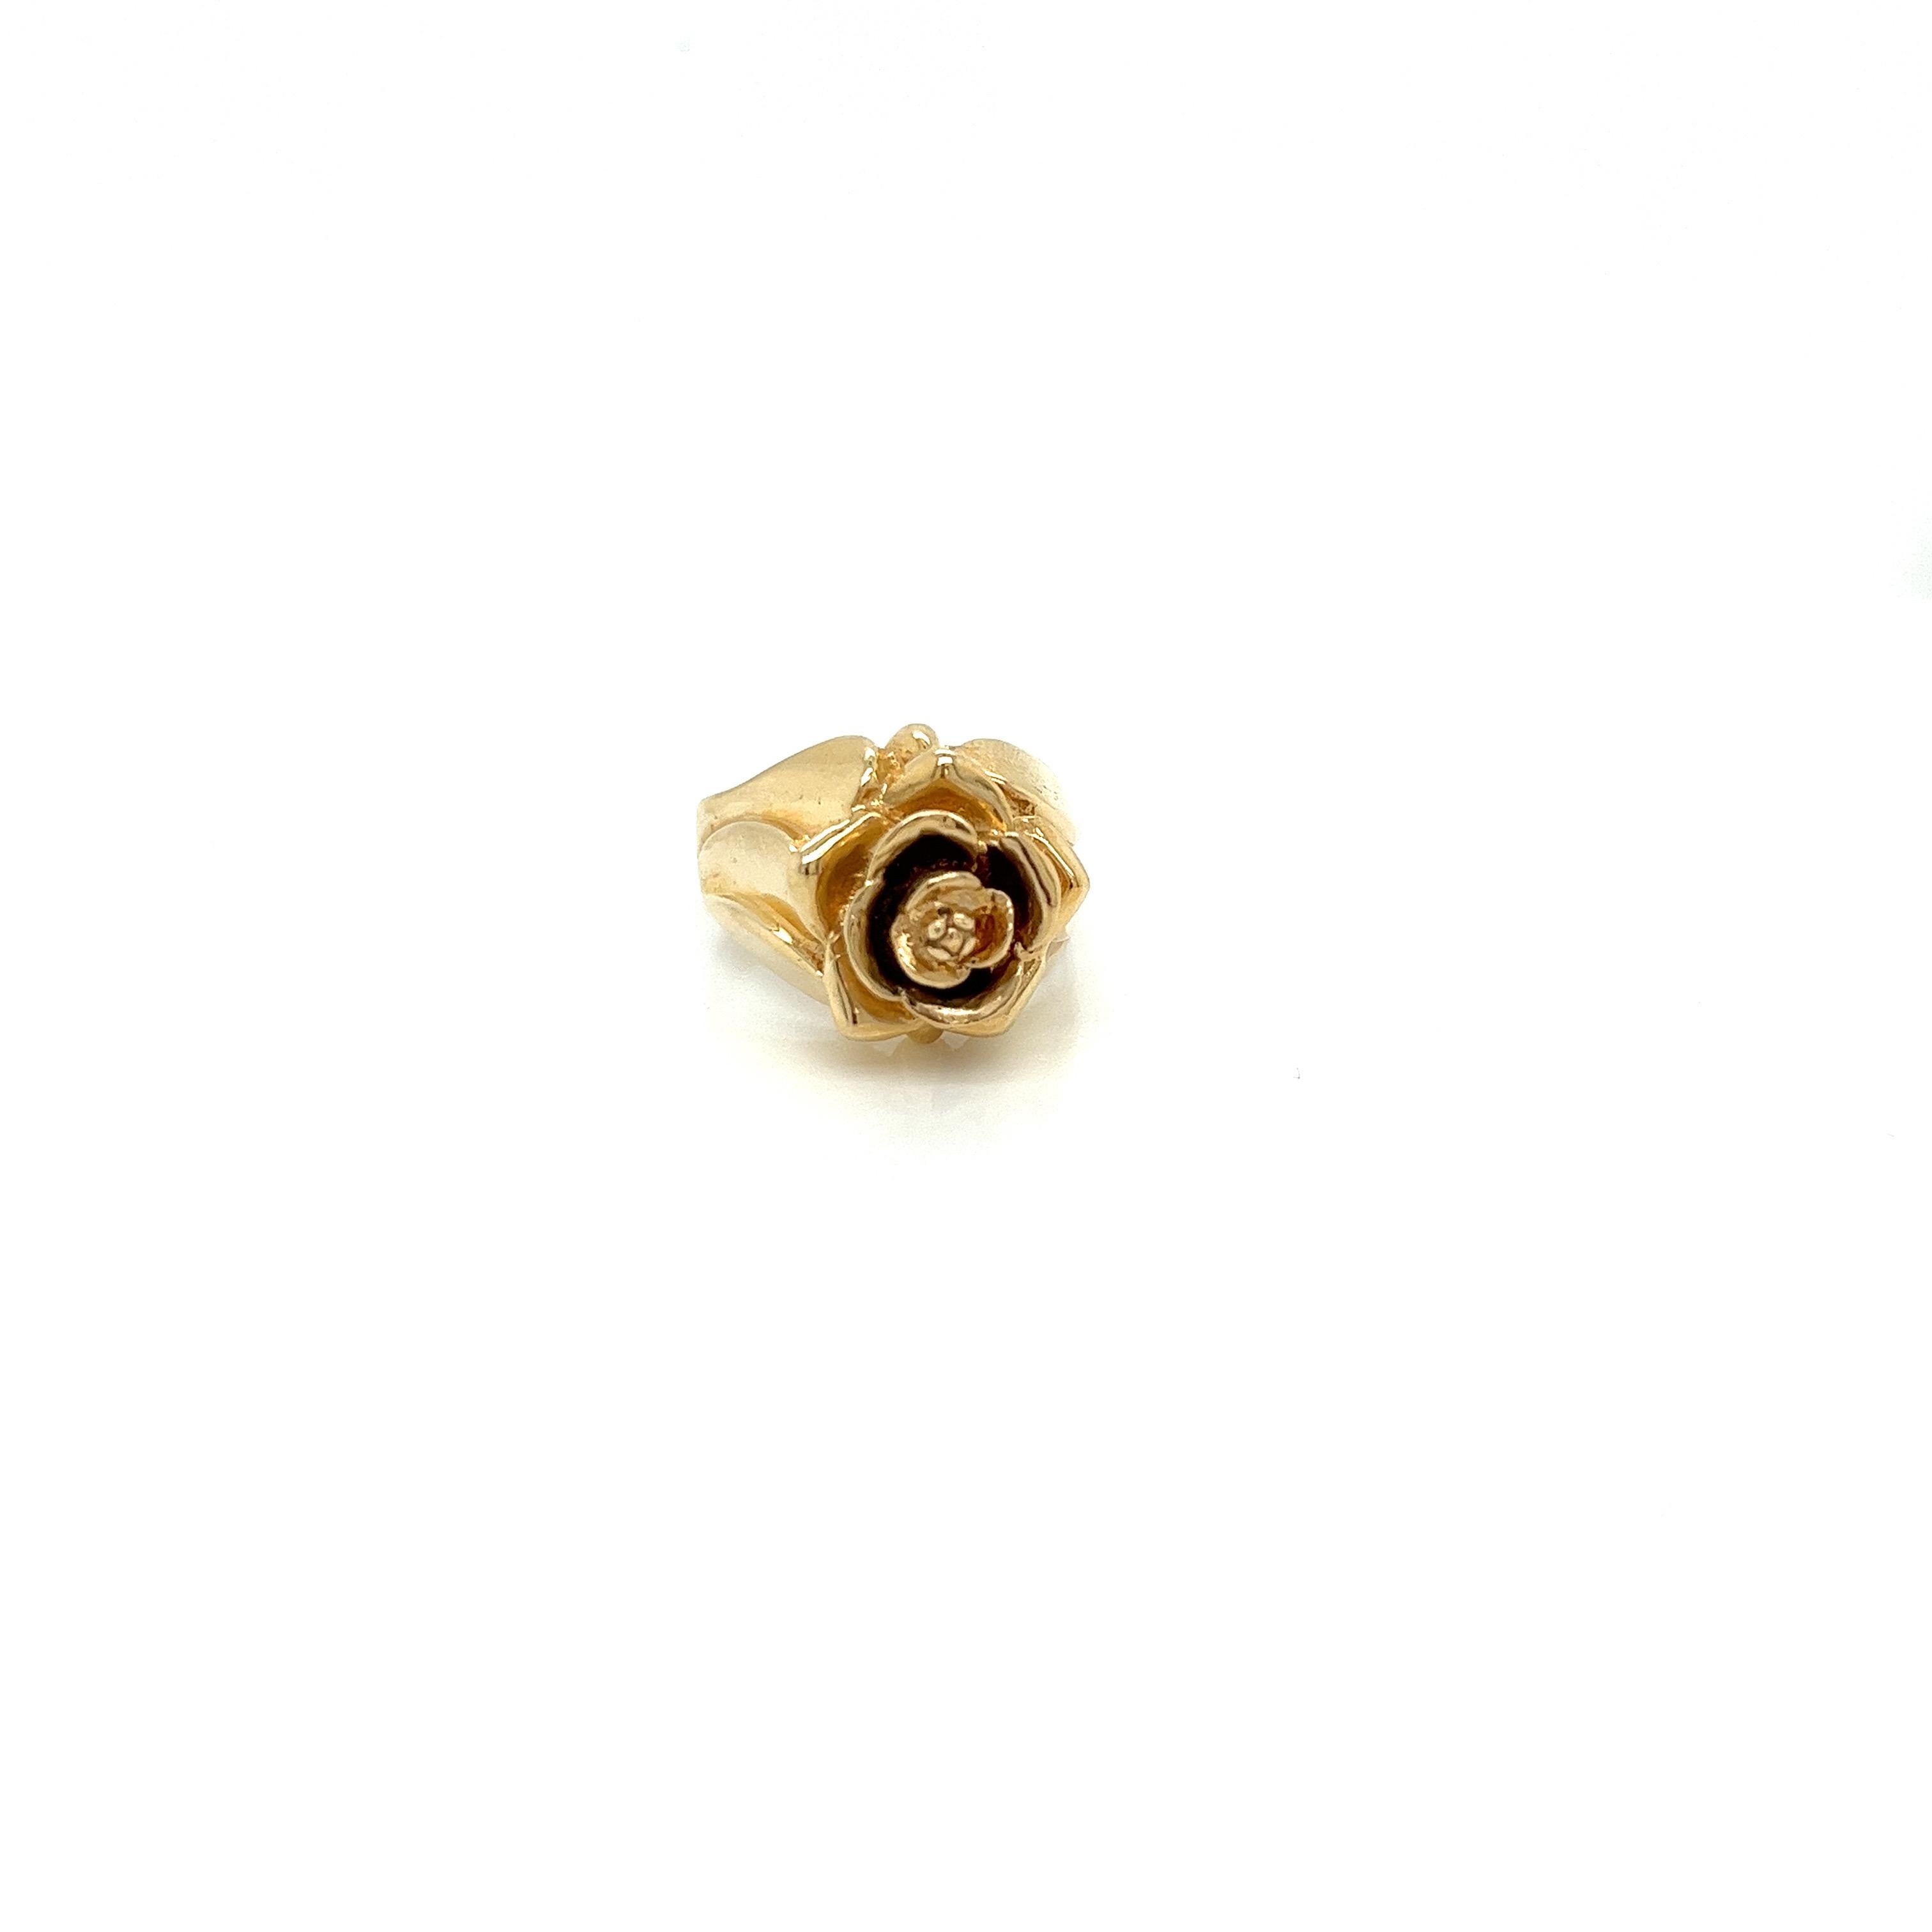 Vintage 1980's 14k Yellow Gold Rose Flower Statement Ring. The ring measures 15mm wide on the top and tapers to 7.5mm on the side and 3.8mm on the bottom. The height off the finger is 11mm. The ring weighs 8.14g. The finger size is 7 and can be